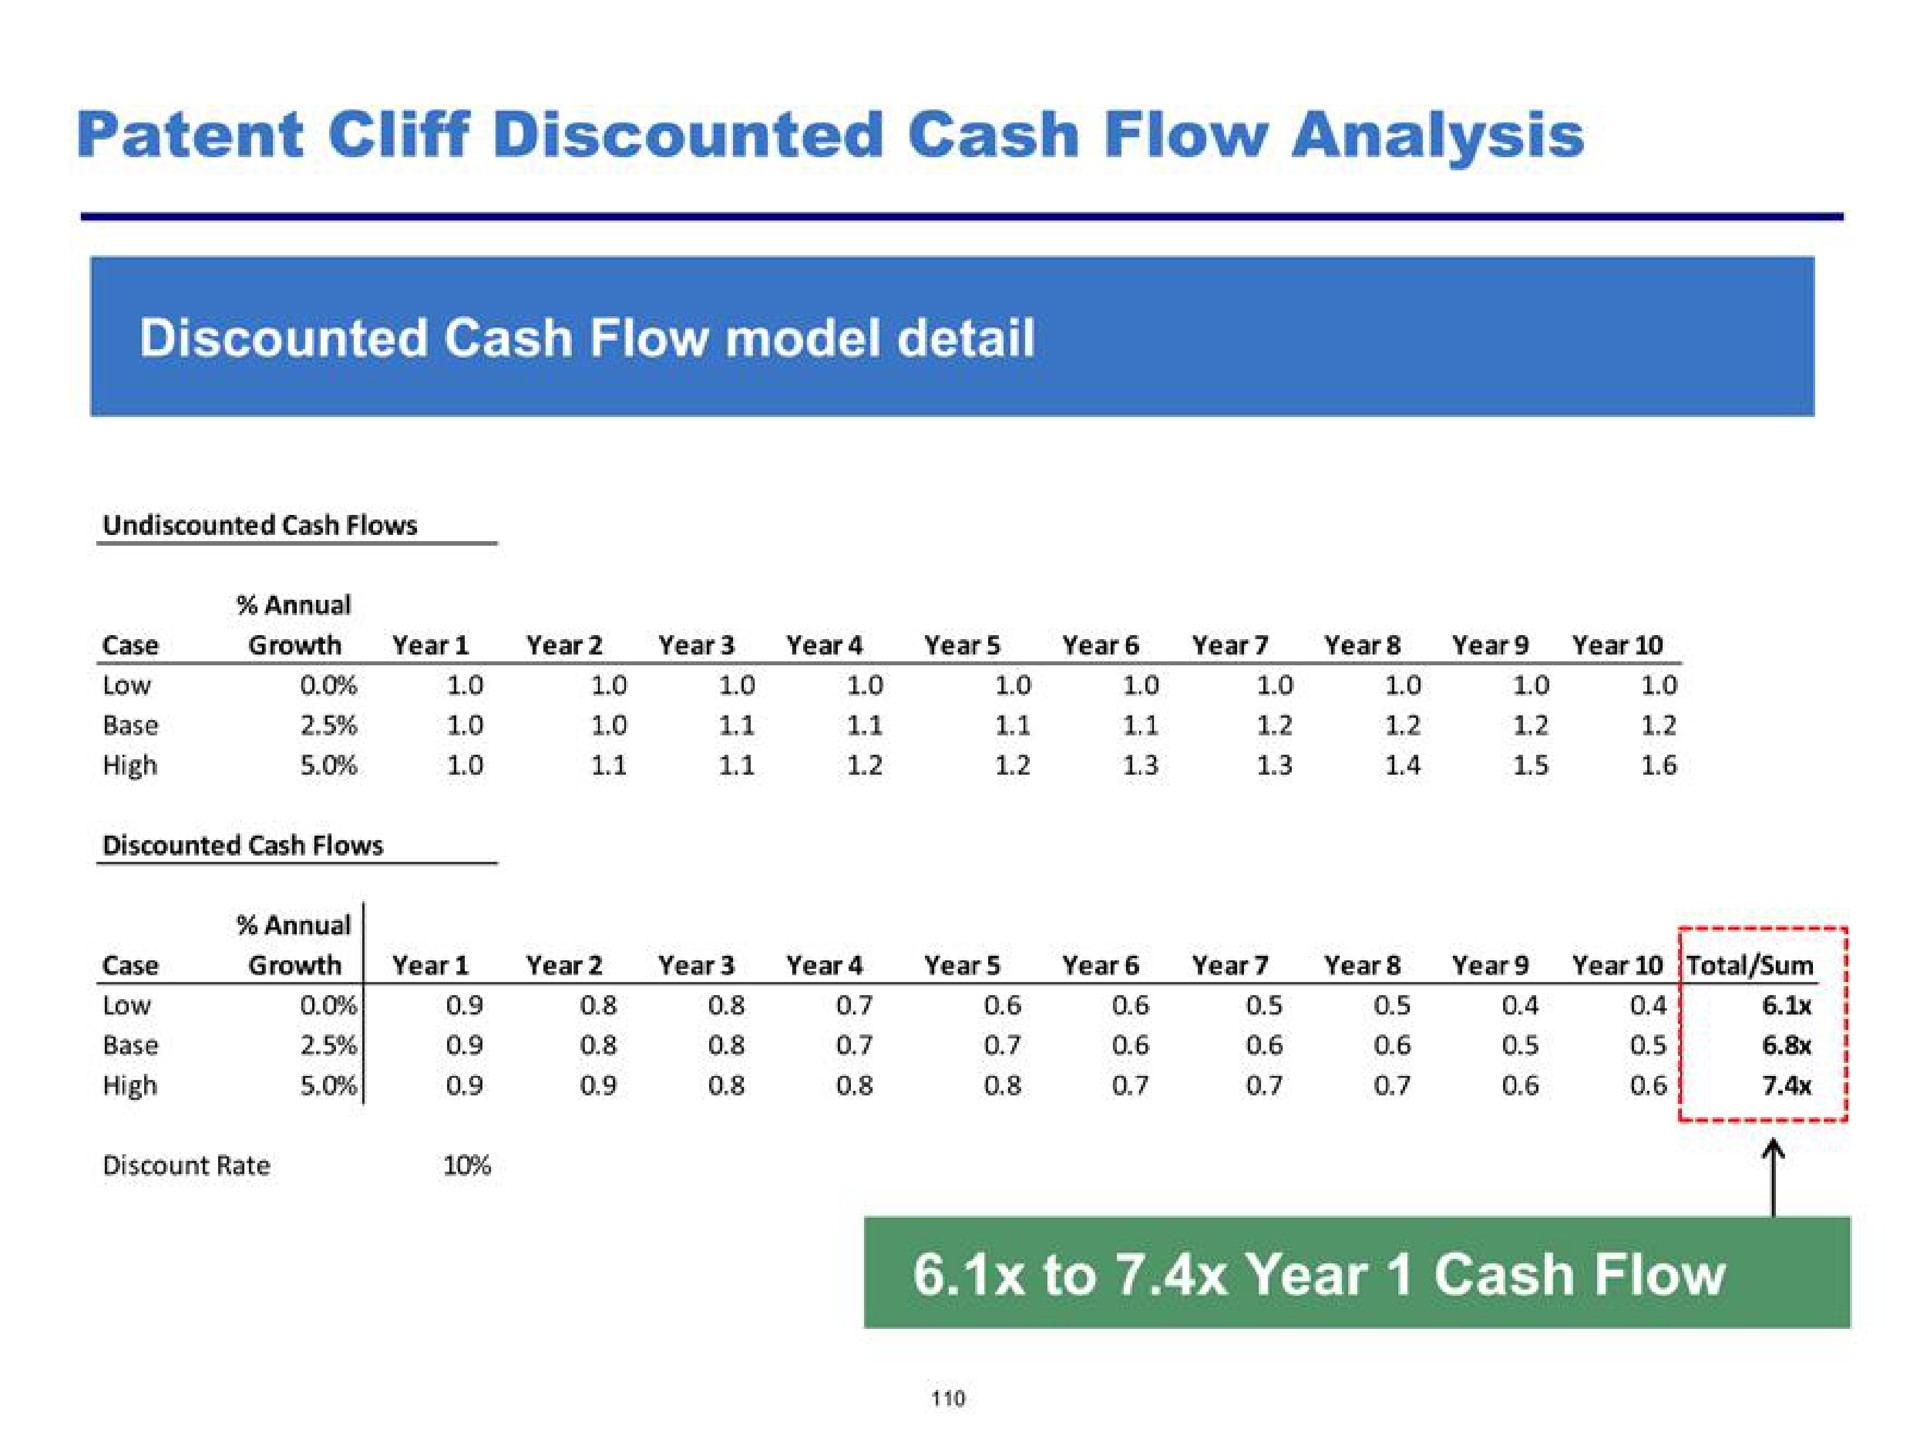 patent cliff discounted cash flow analysis | Pershing Square